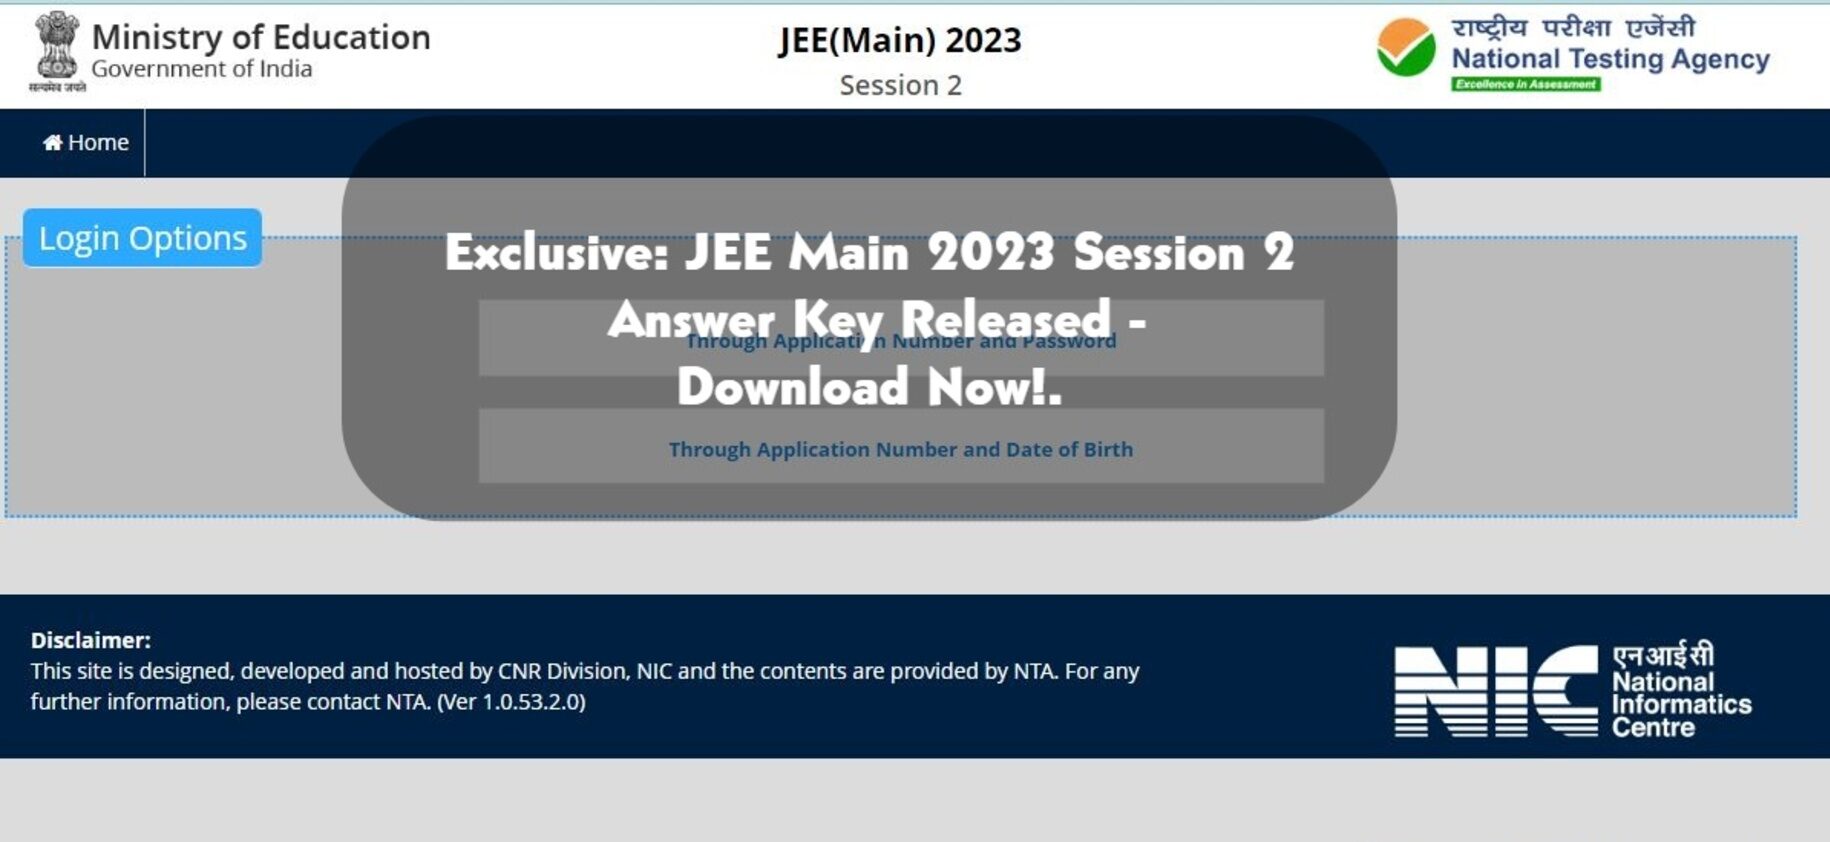 The JEE Main 2023 Session 2 Answer Key is now available for download. Find out how to calculate your expected score and challenge any discrepancies.